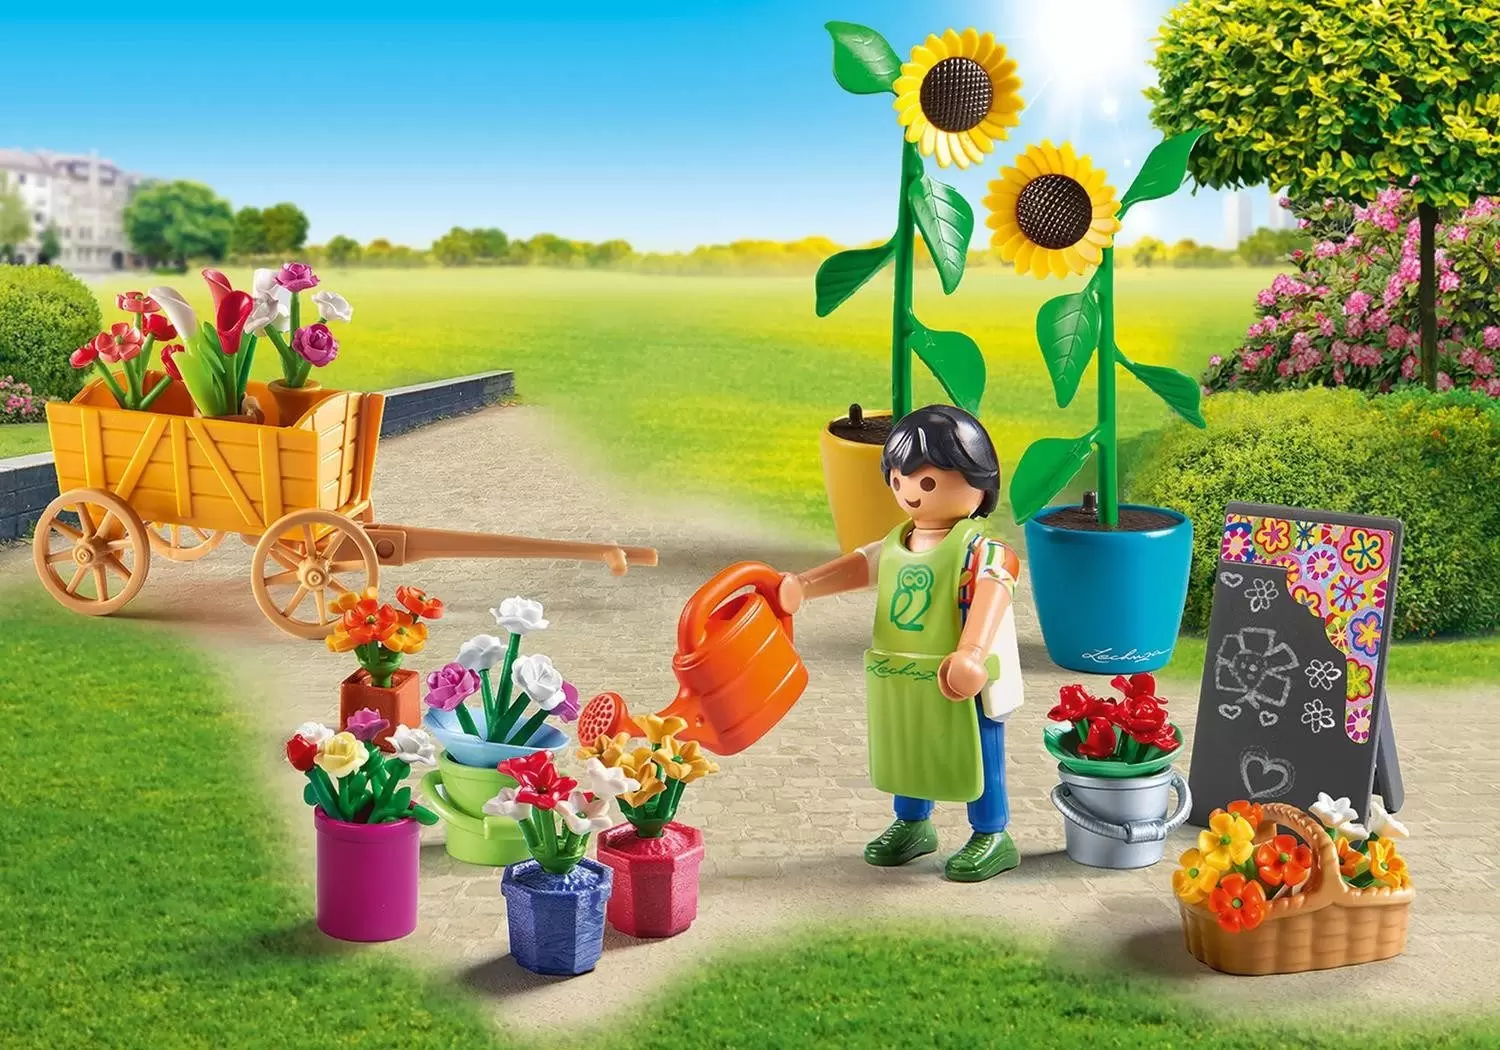 Playmobil in the City - Flower traders